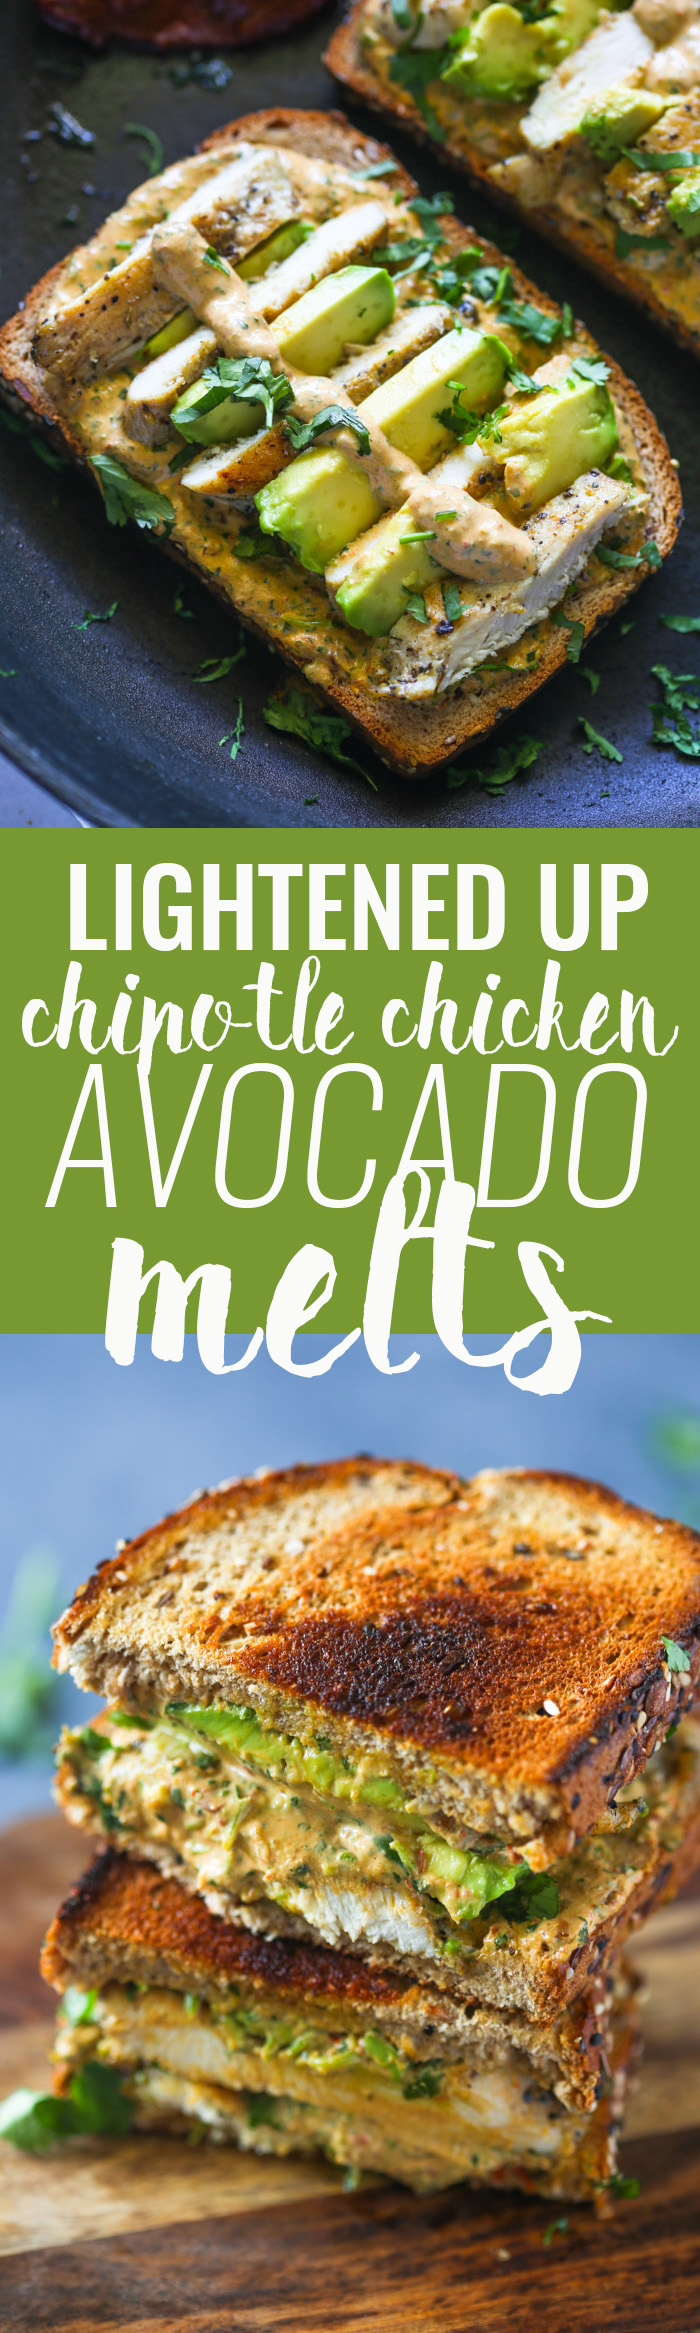 Lightened Up Chipotle Chicken and Avocado Melts